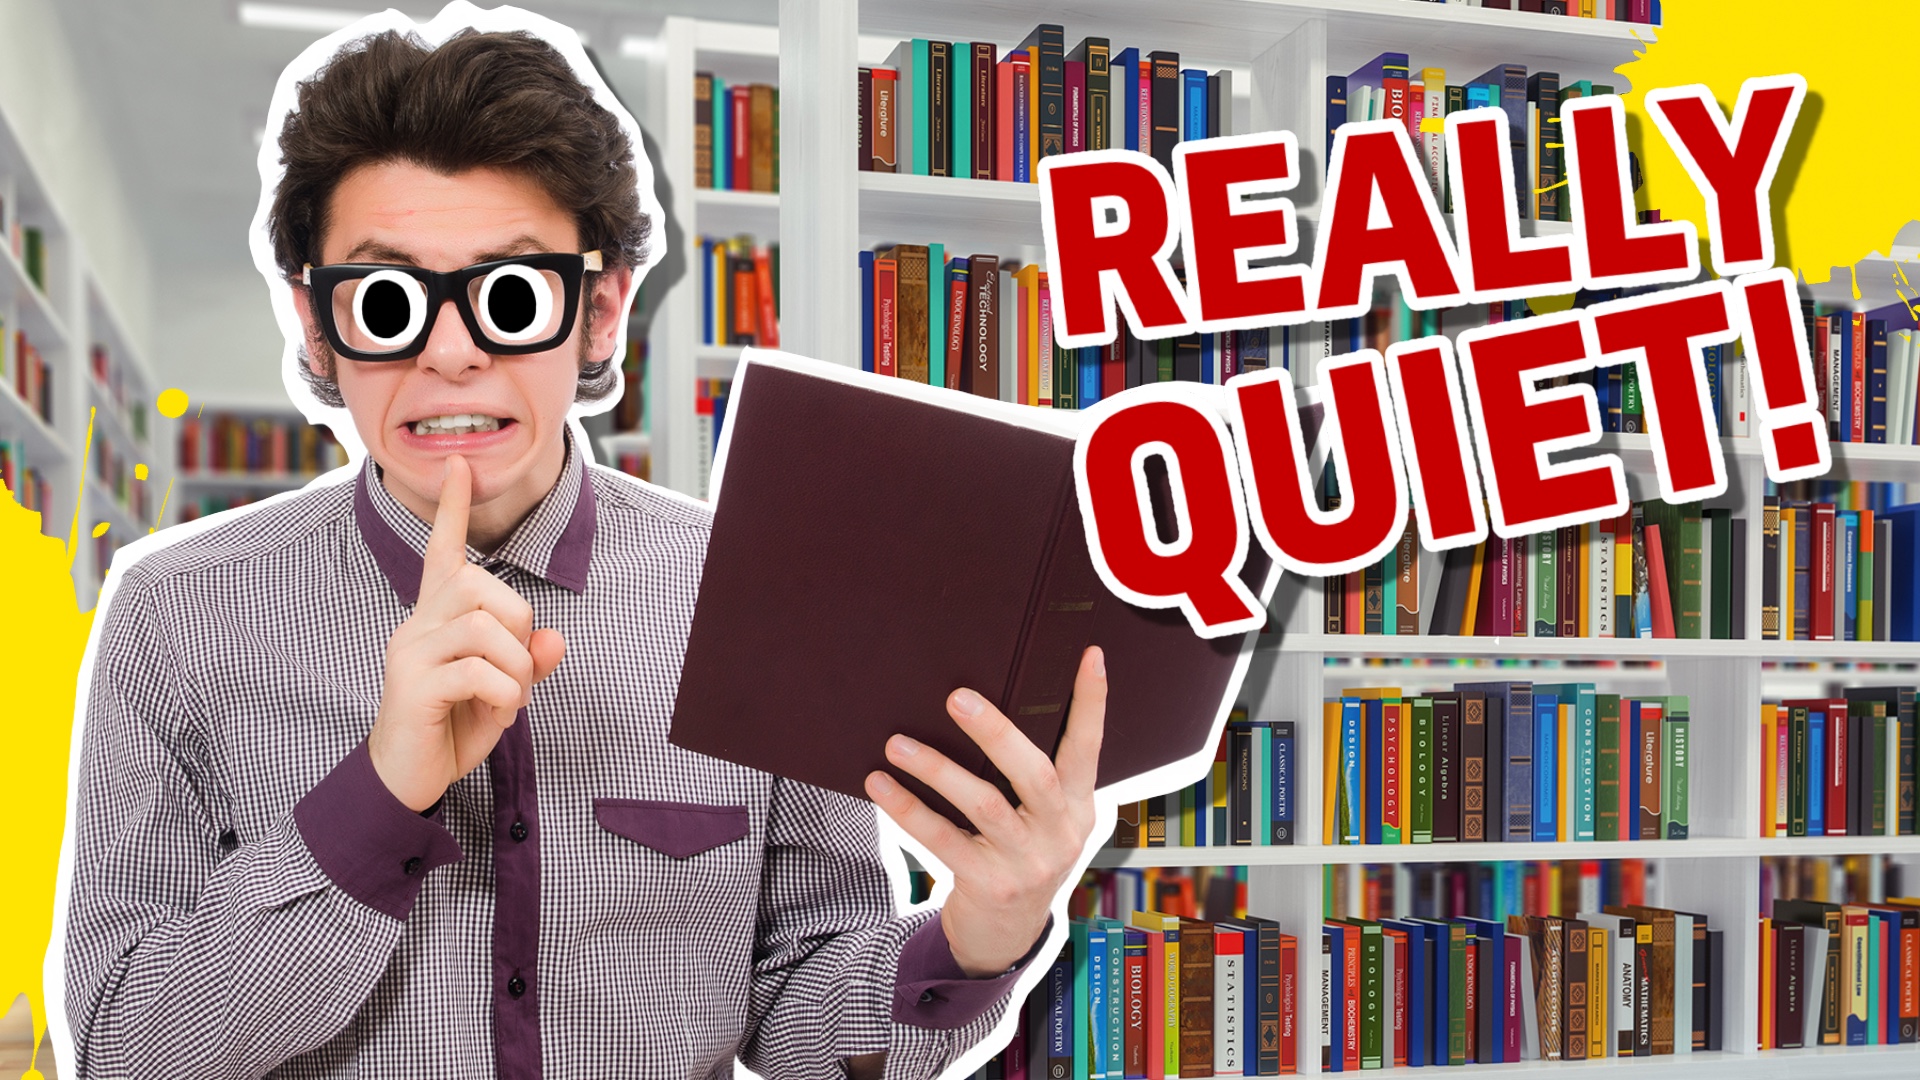 Reading style: REALLY QUIET